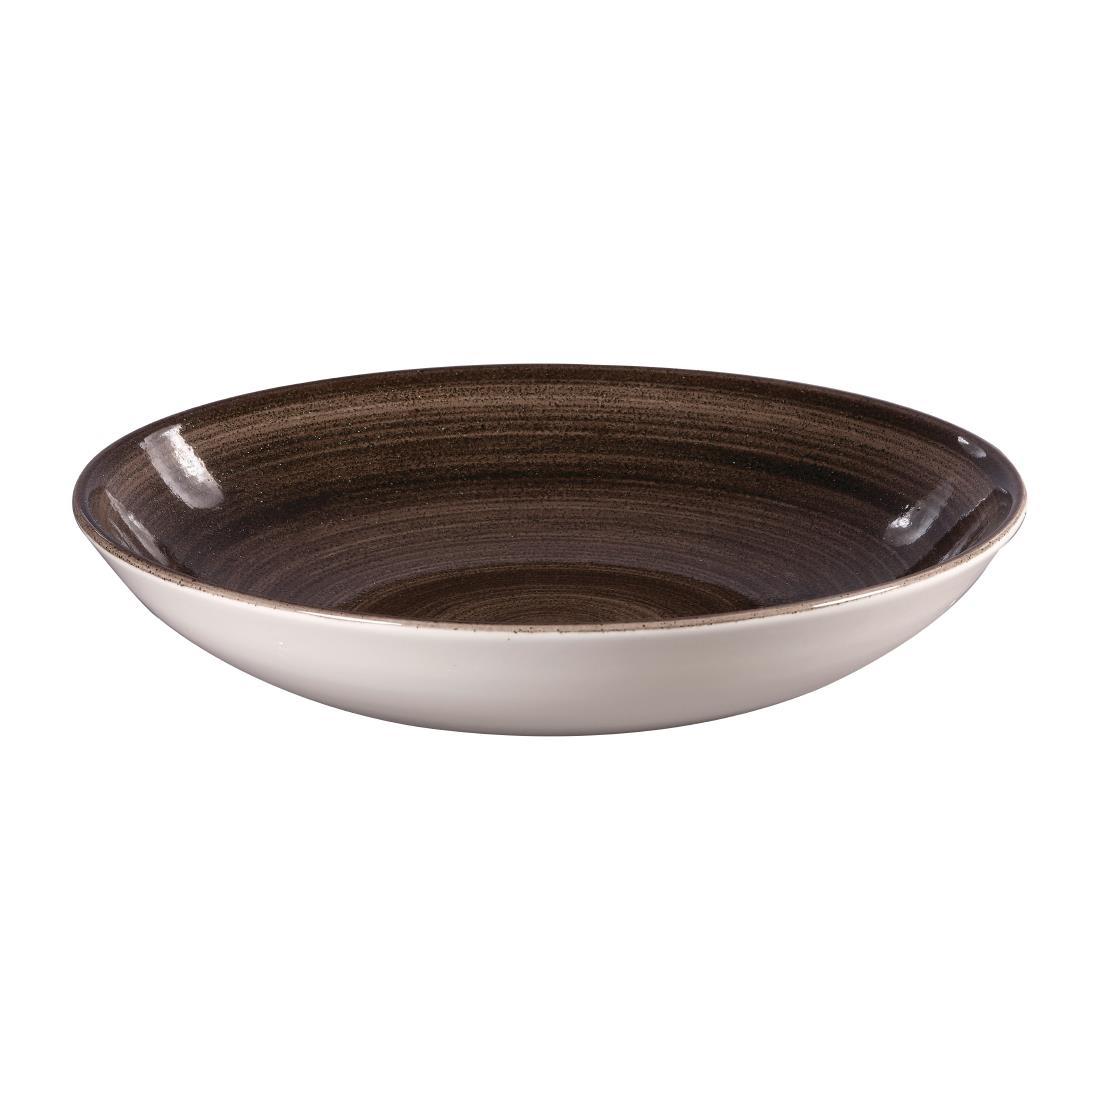 Churchill Stonecast Patina Coupe Bowls Black 248mm (Pack of 12) - DR654  - 2